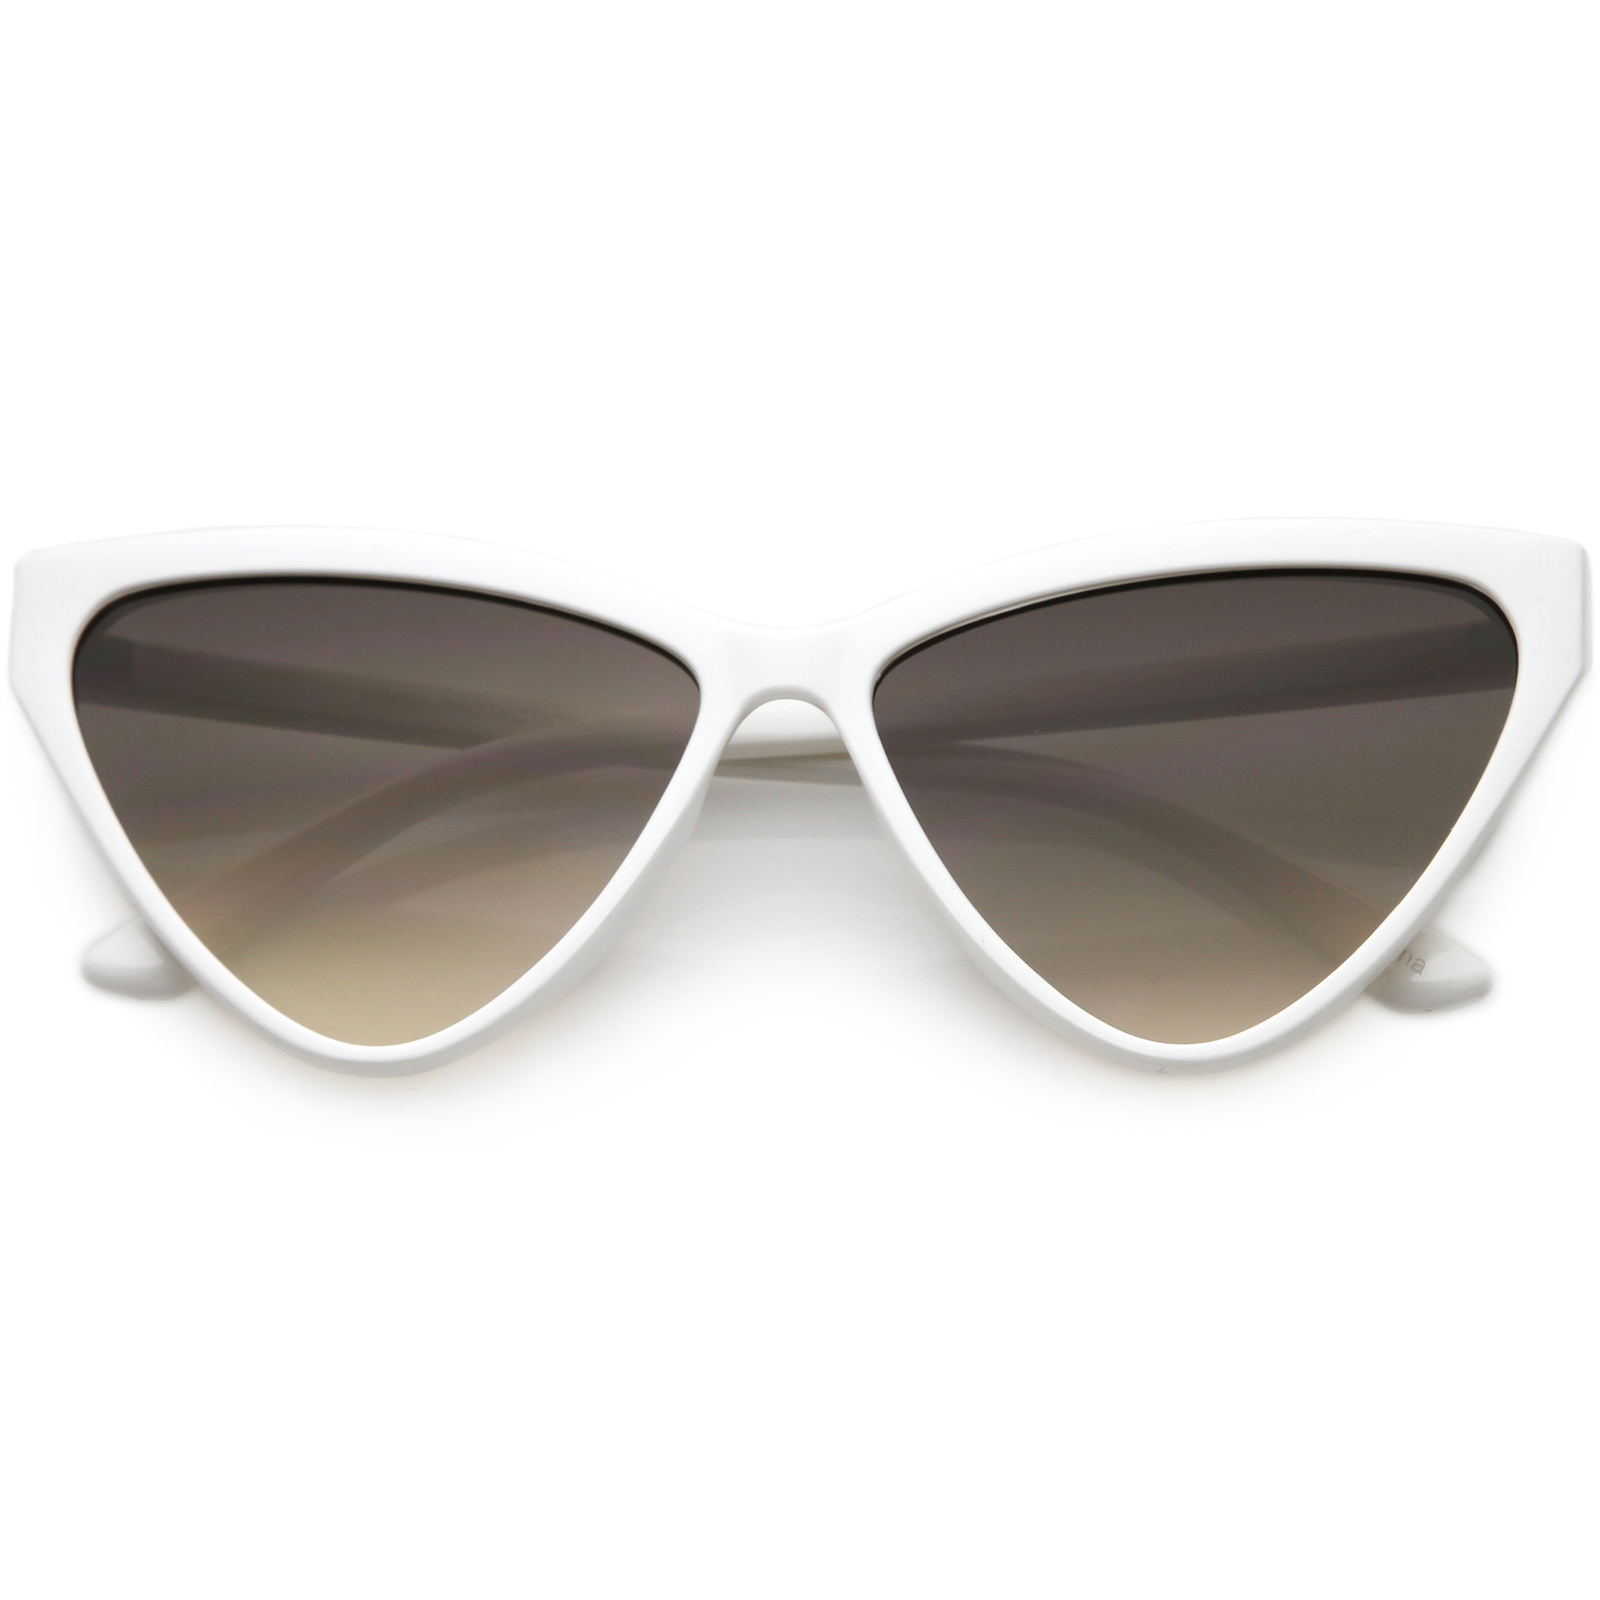 Oversize Vintage Cat Eye Sunglasses Color Tinted Lens 59mm (White / Smoke Gradient) - image 1 of 4